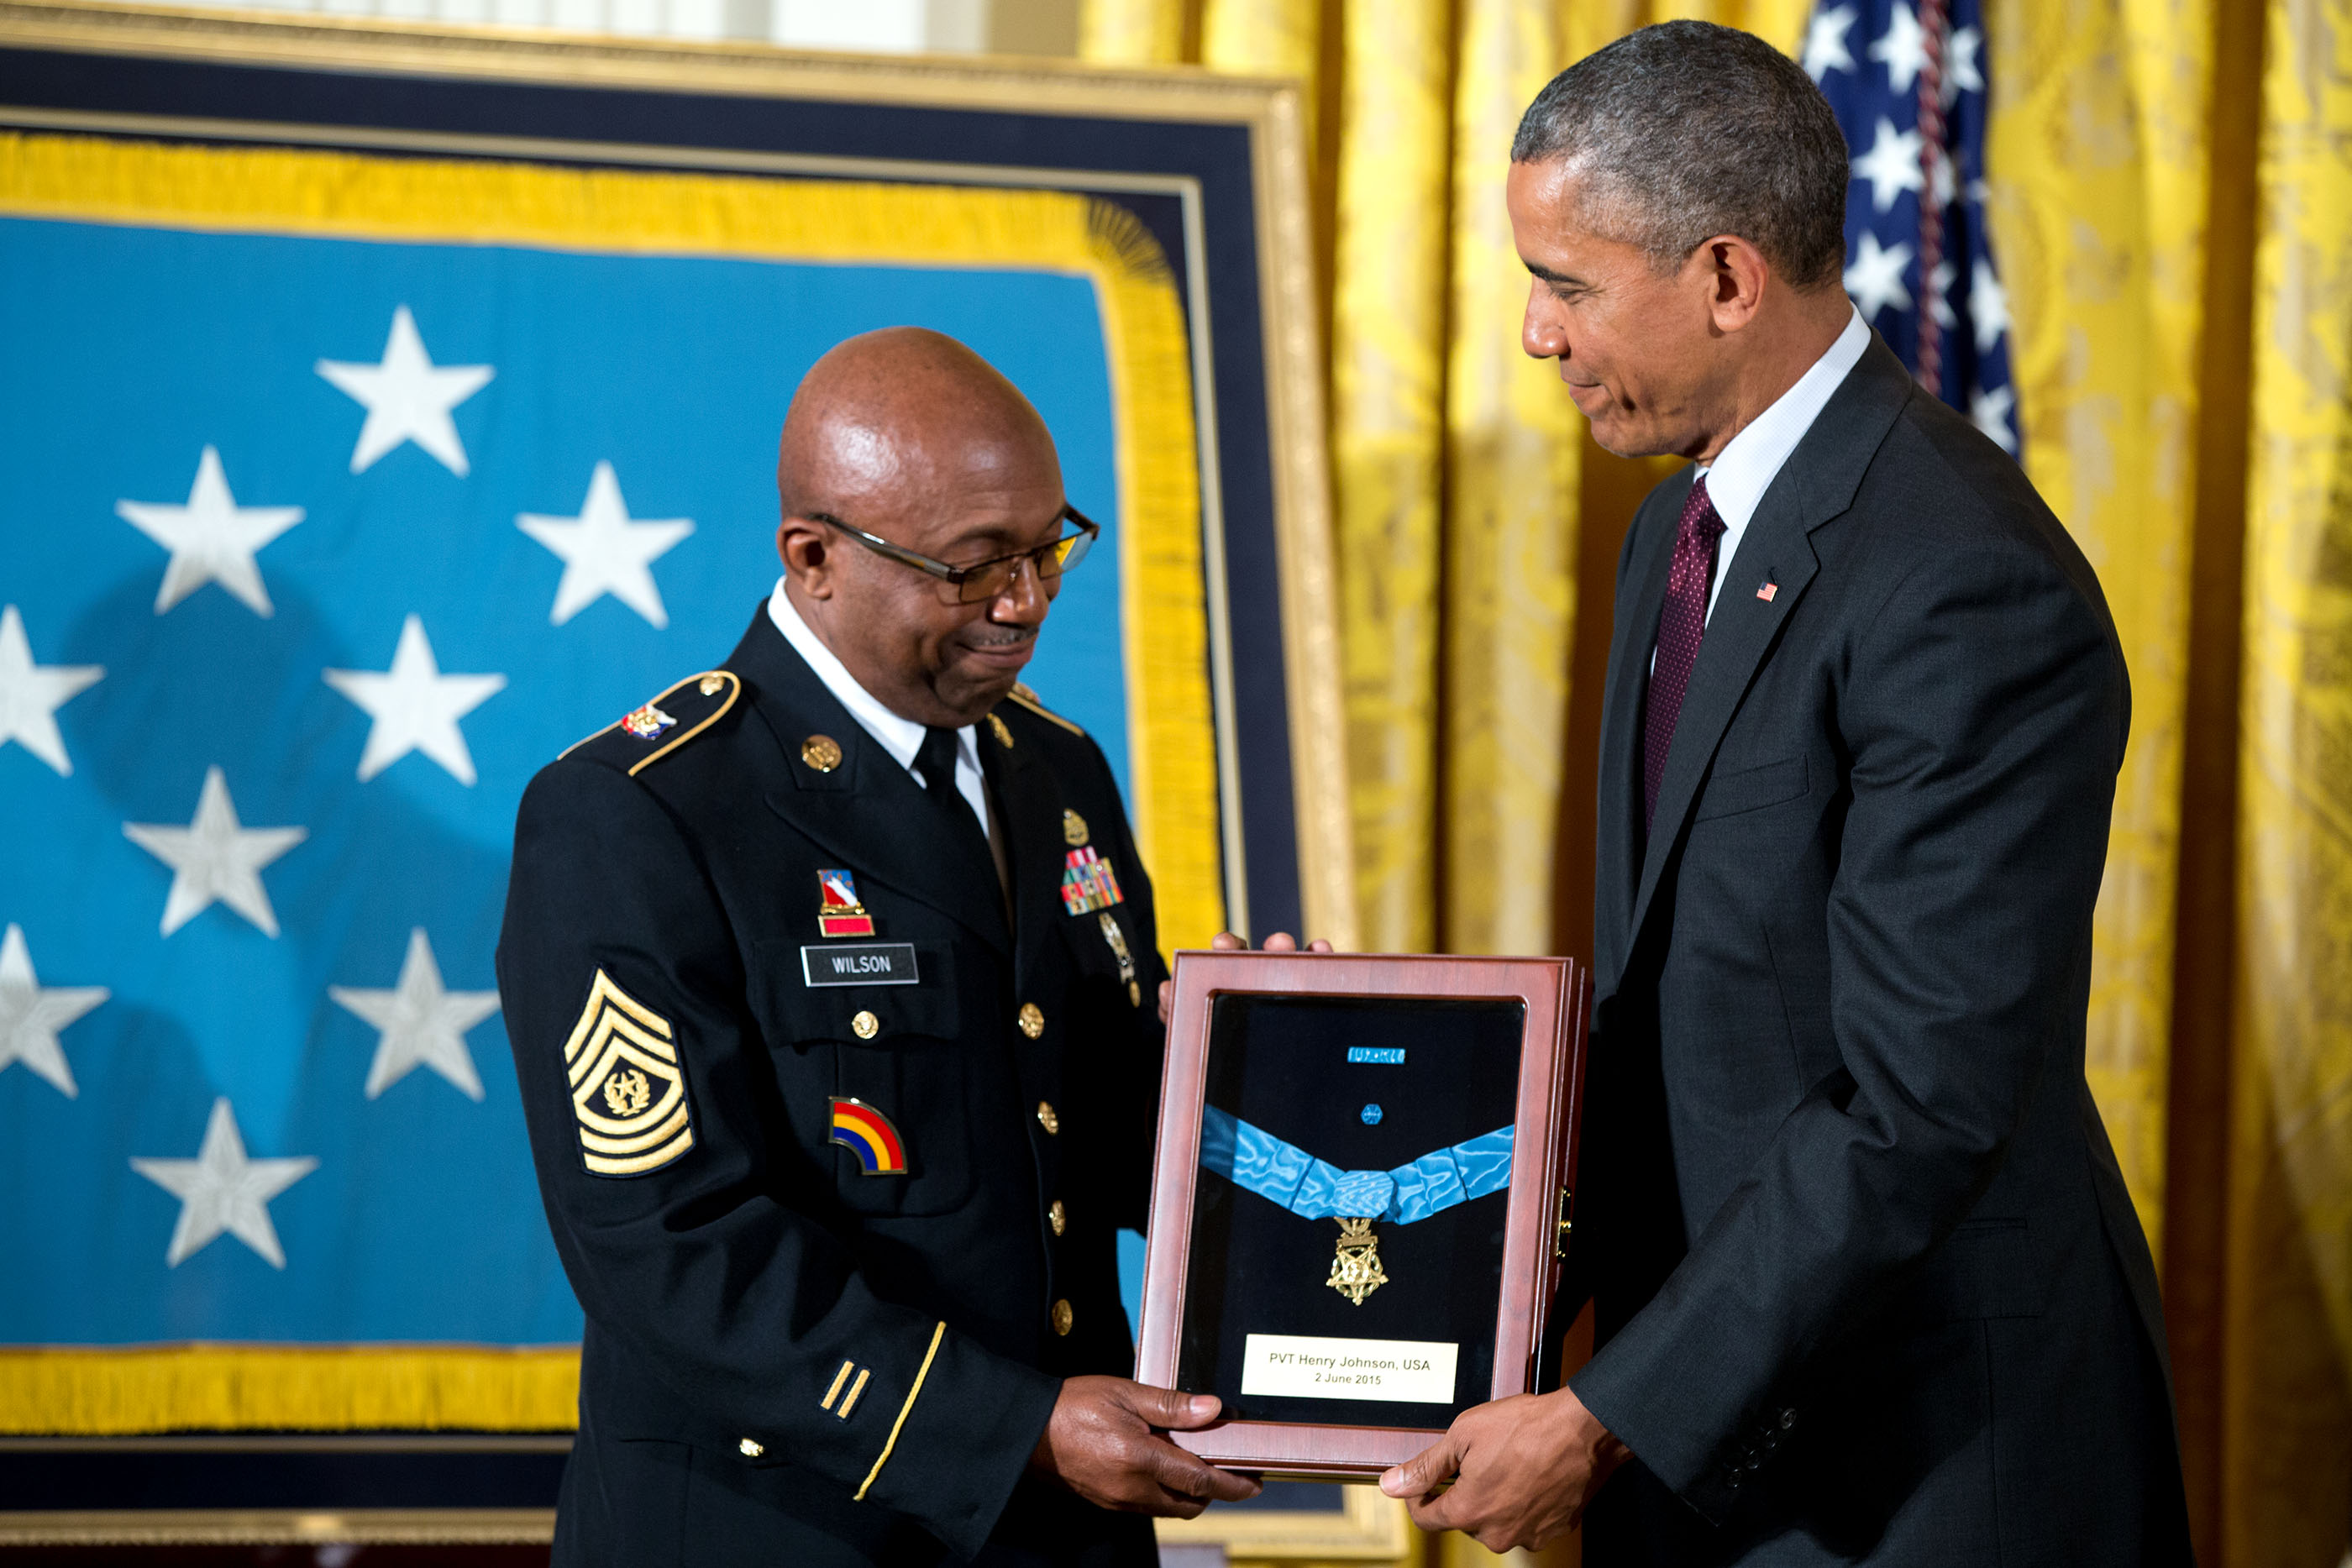 Command Sergeant Major Louis Wilson accepts the Medal of Honor from President Barack Obama awarded posthumously to Army Private Henry Johnson for conspicuous gallantry during World War I, at a ceremony in the East Room of the White House, June 2, 2015.